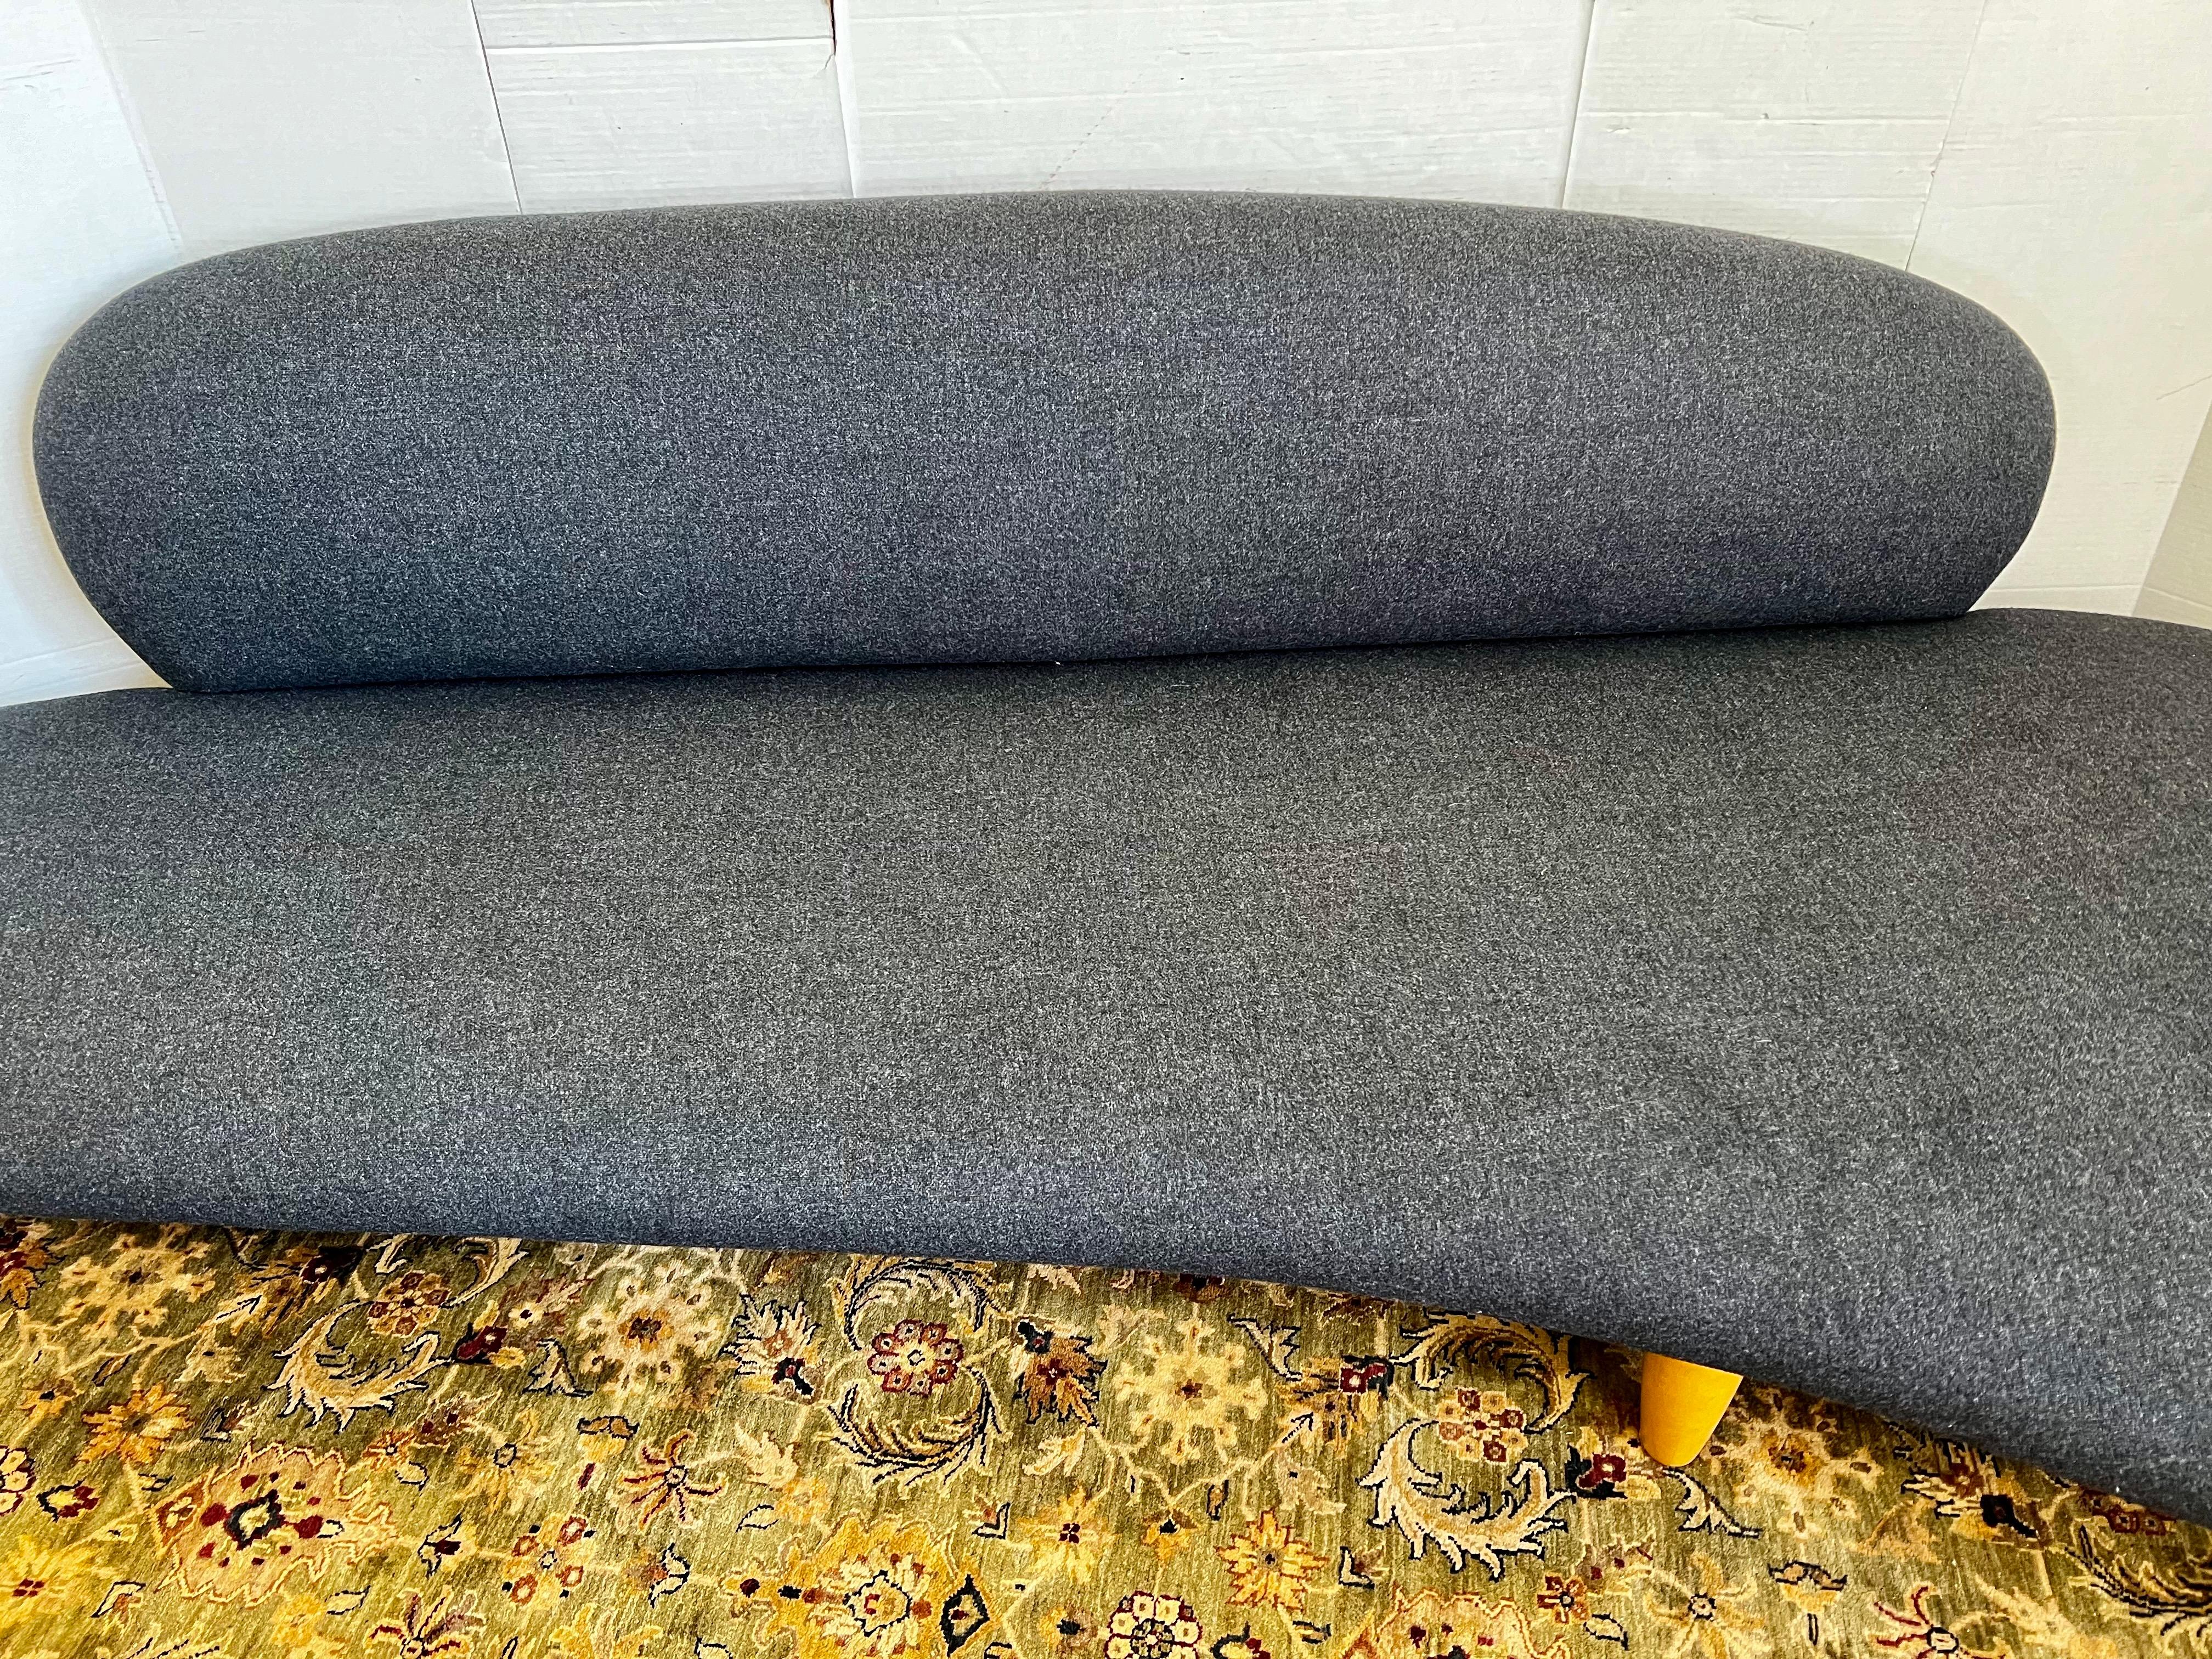 Signed Vitra Isamu Noguchi Freeform Cloud Large Biomorphic Sofa & Ottoman In Good Condition For Sale In West Hartford, CT